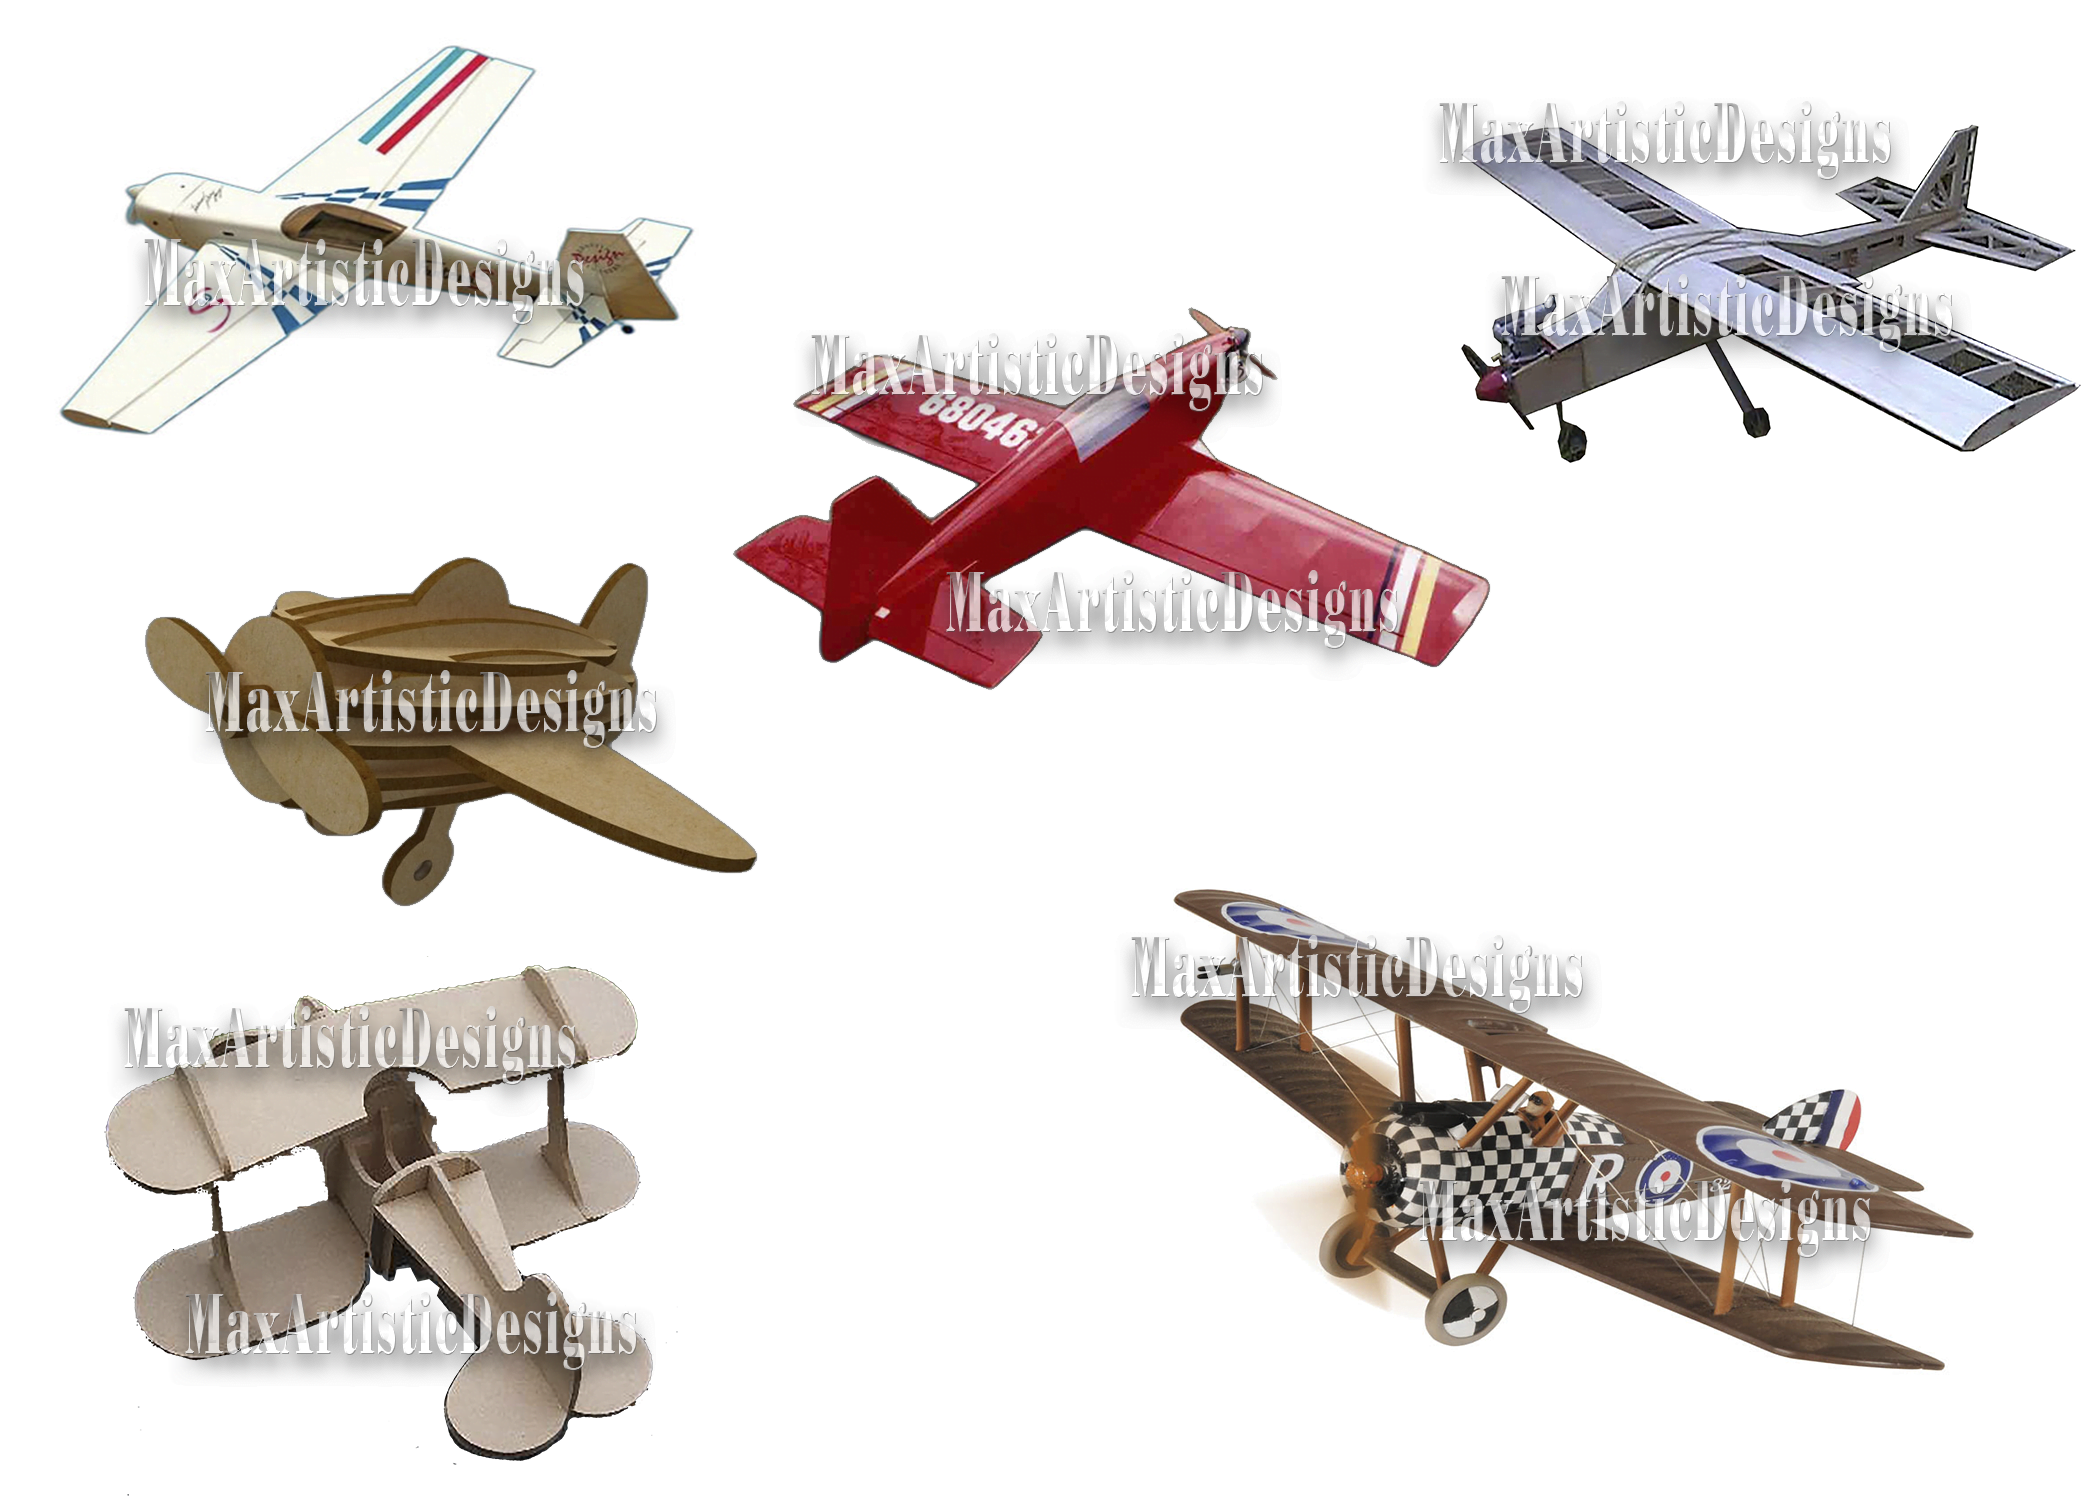 39+ aircraft, helicopters, airplanes cnc vectors in dxf cdr files for pantograph cnc router download